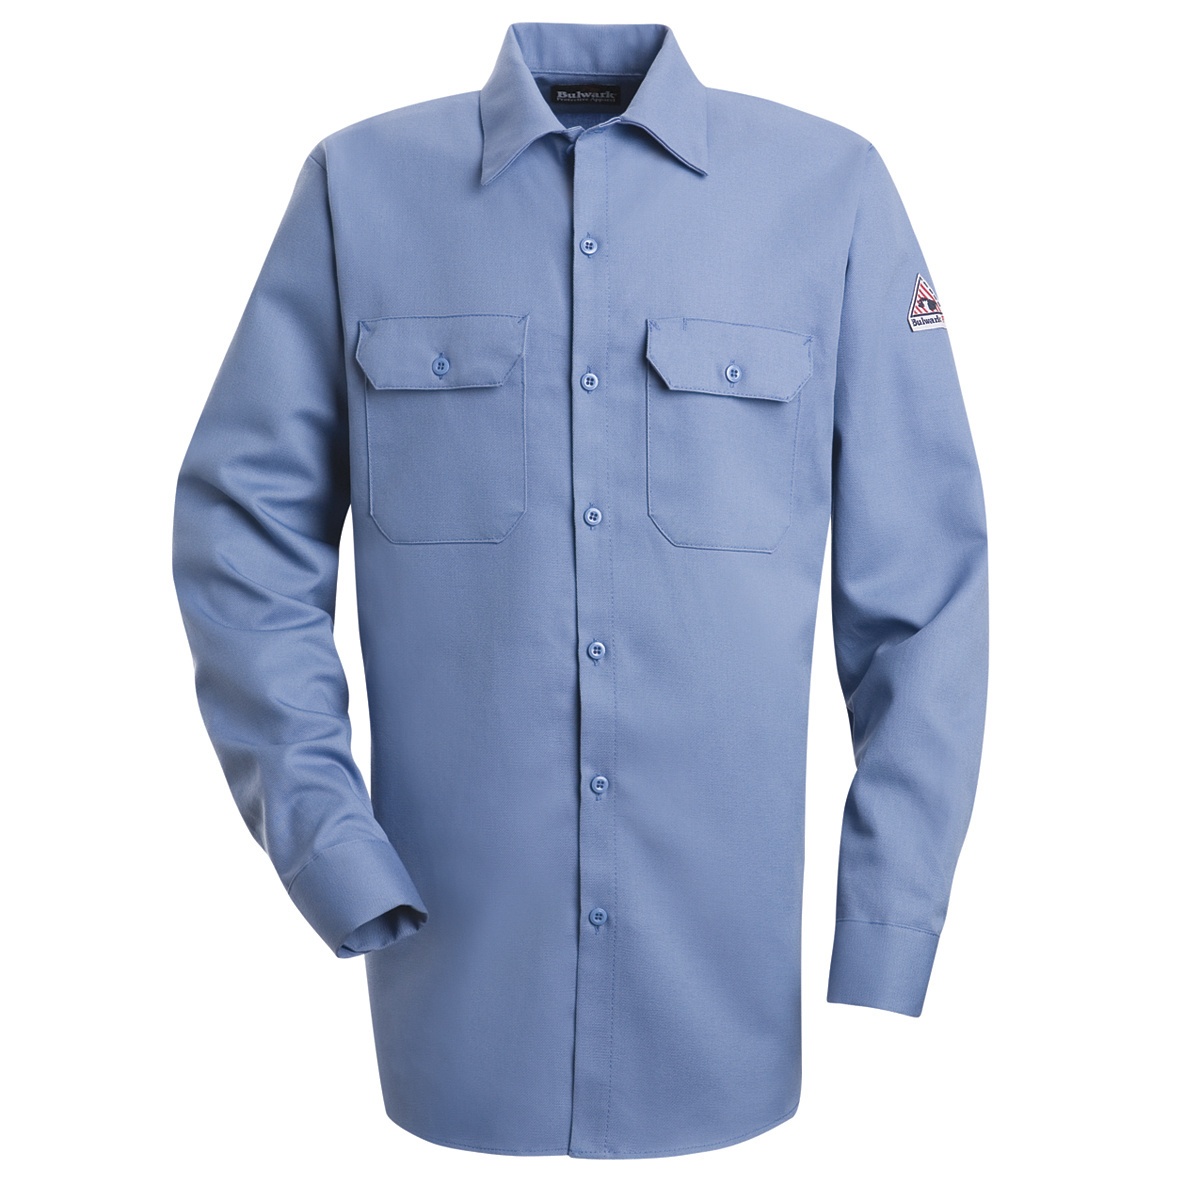 Bulwark® X-Large Tall Light Blue Westex Ultrasoft®/Cotton/Nylon Flame Resistant Work Shirt With Button Front Closure